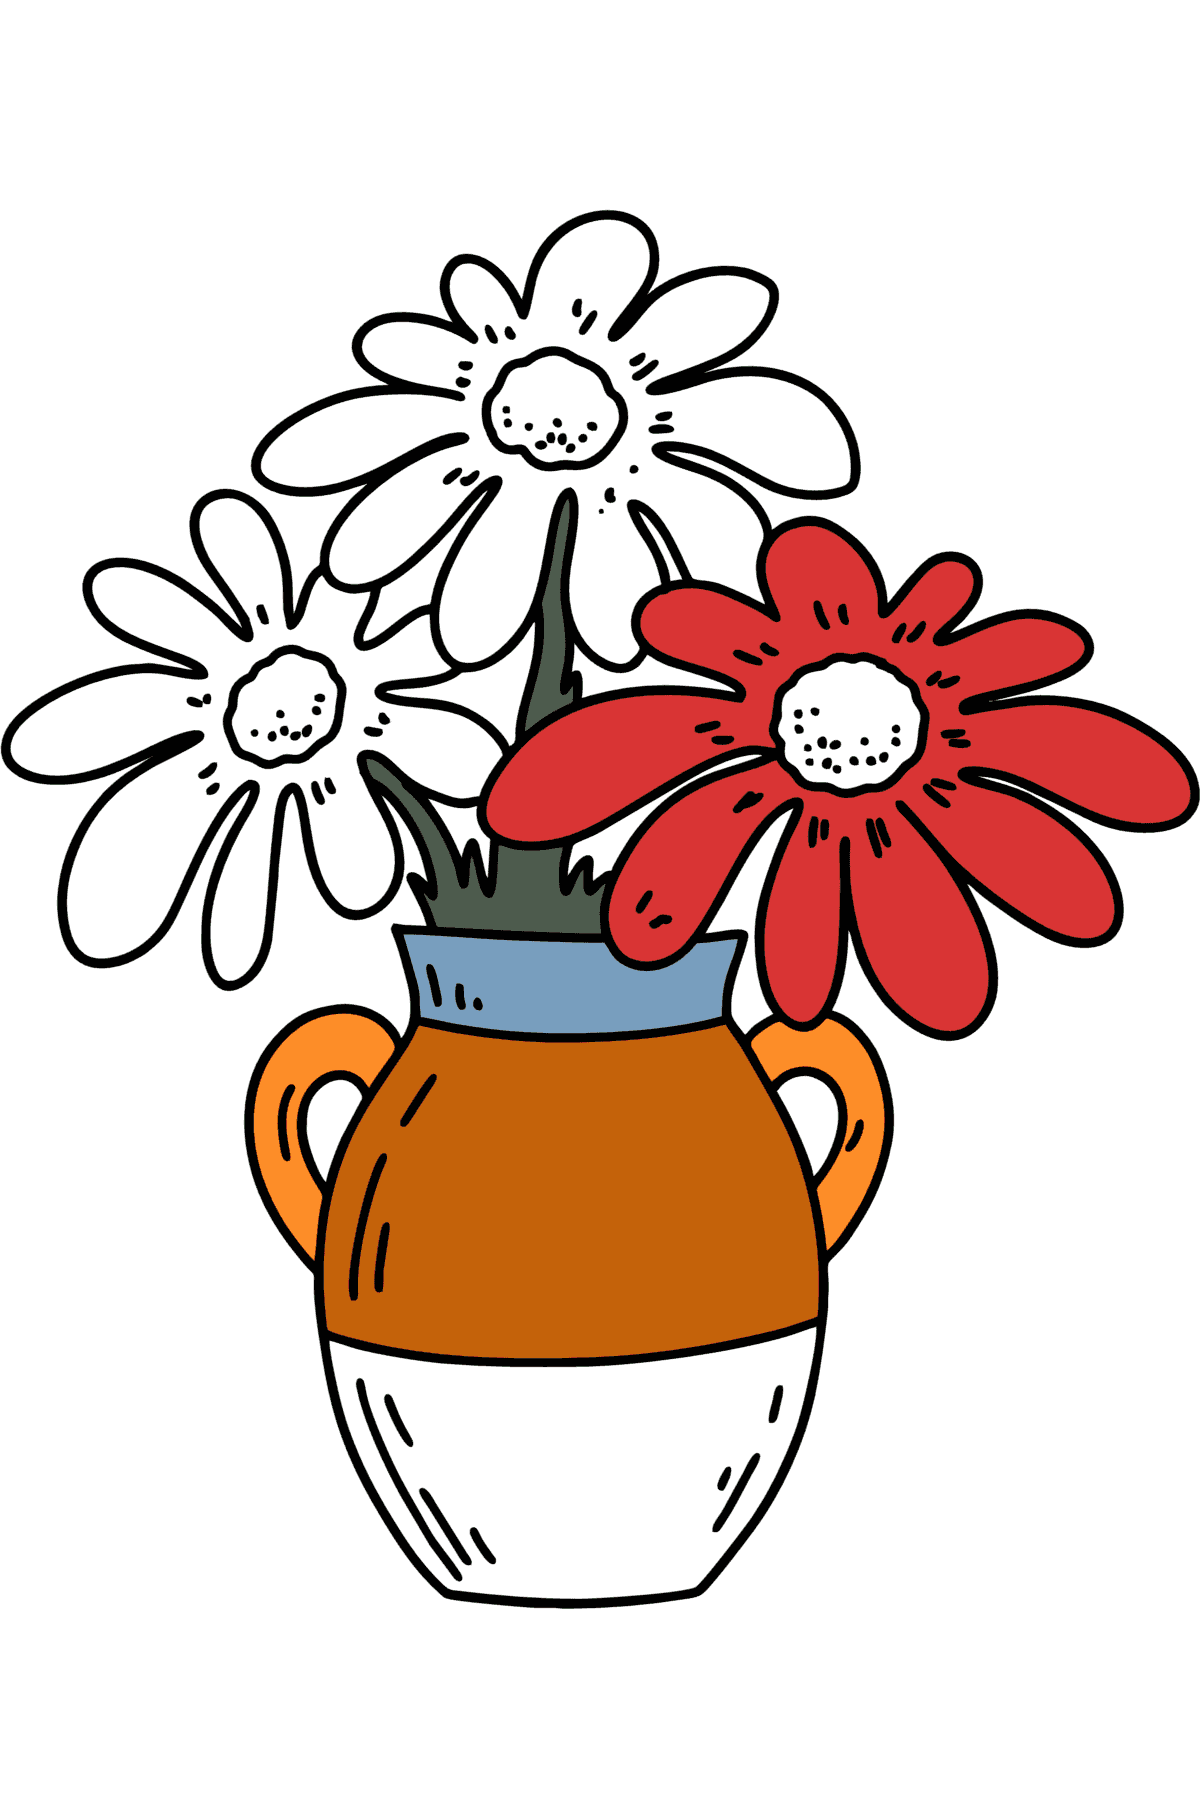 Summer Coloring page - Flowers in a vase - Coloring Pages for Kids